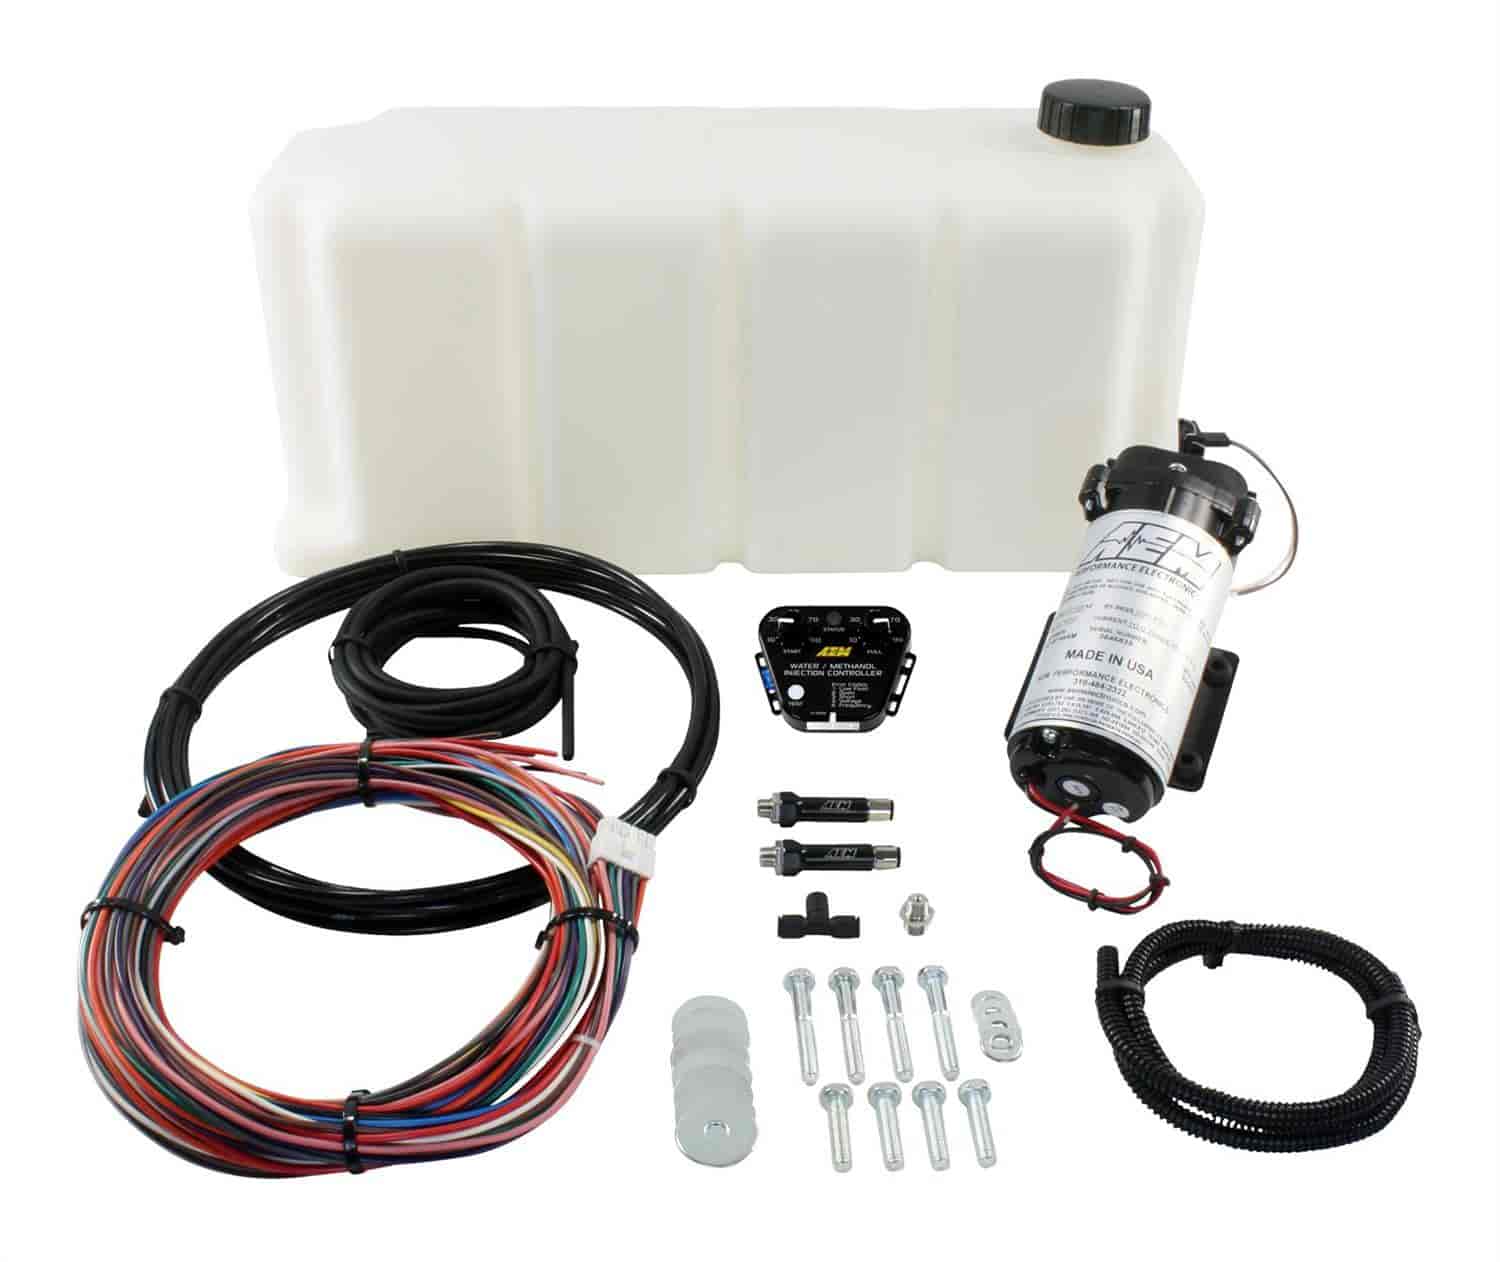 V2 Water/Methanol Injection Kit Includes: Multi Input Controller